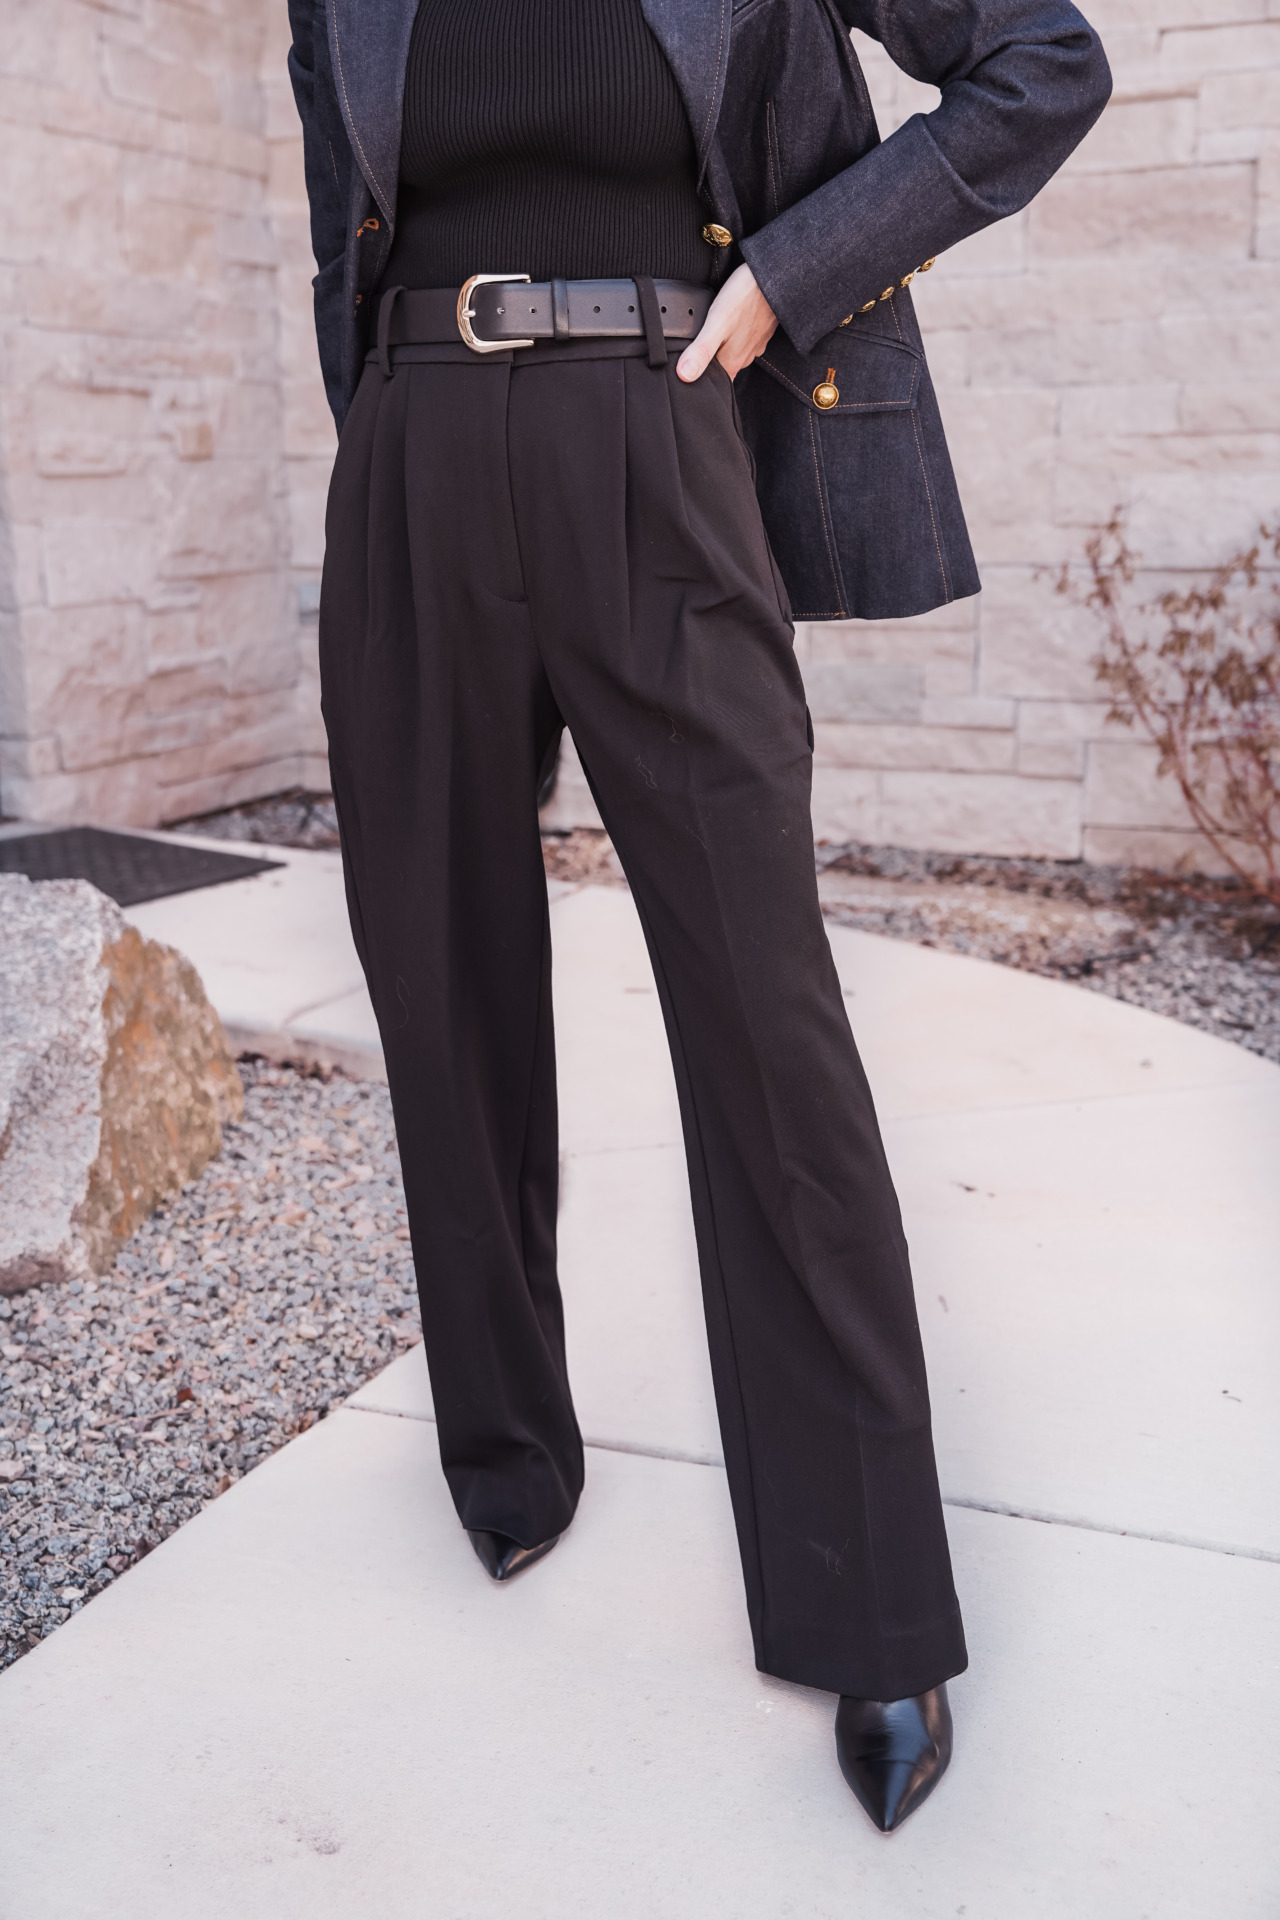 how to style wide leg pants: woman wearing black wide leg pants, black top and a jacket